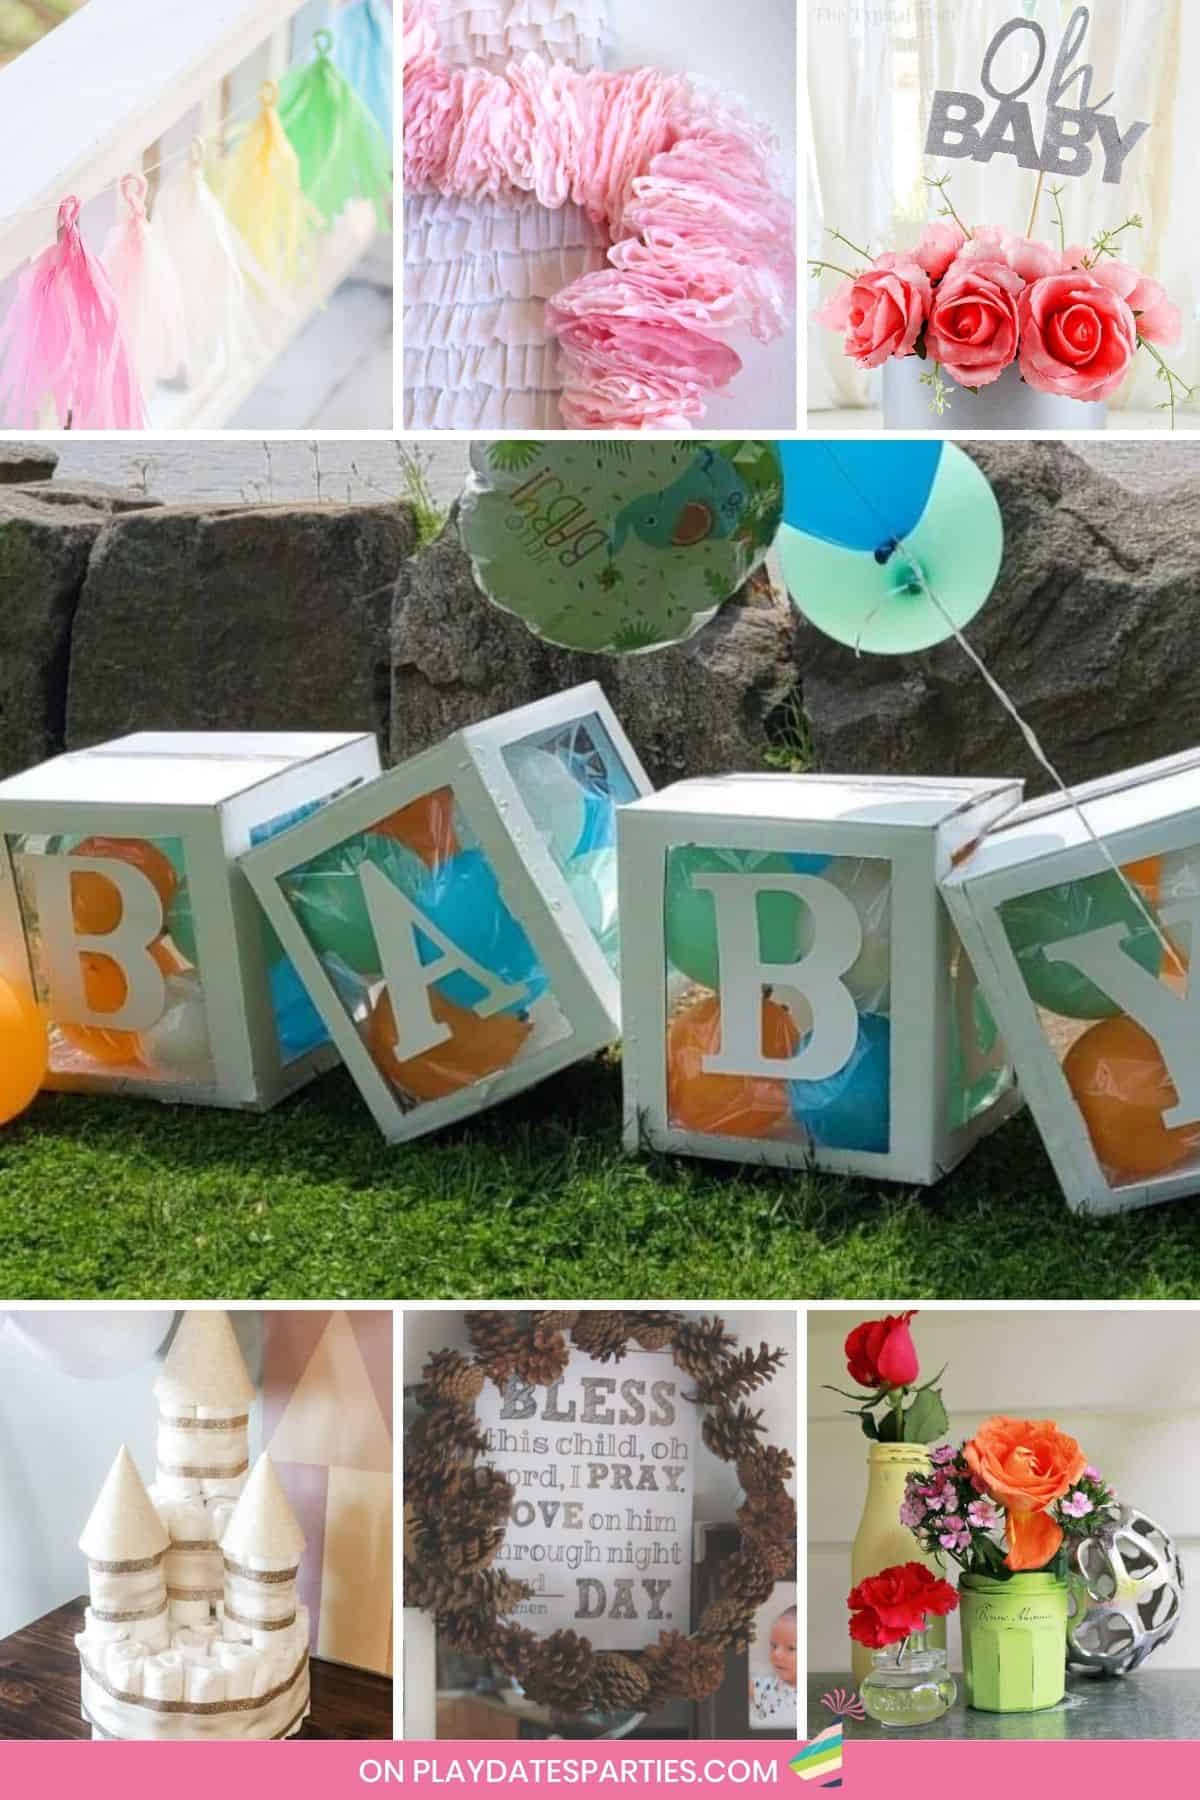 Decoration For Baby Shower In [location] | 7eventzz